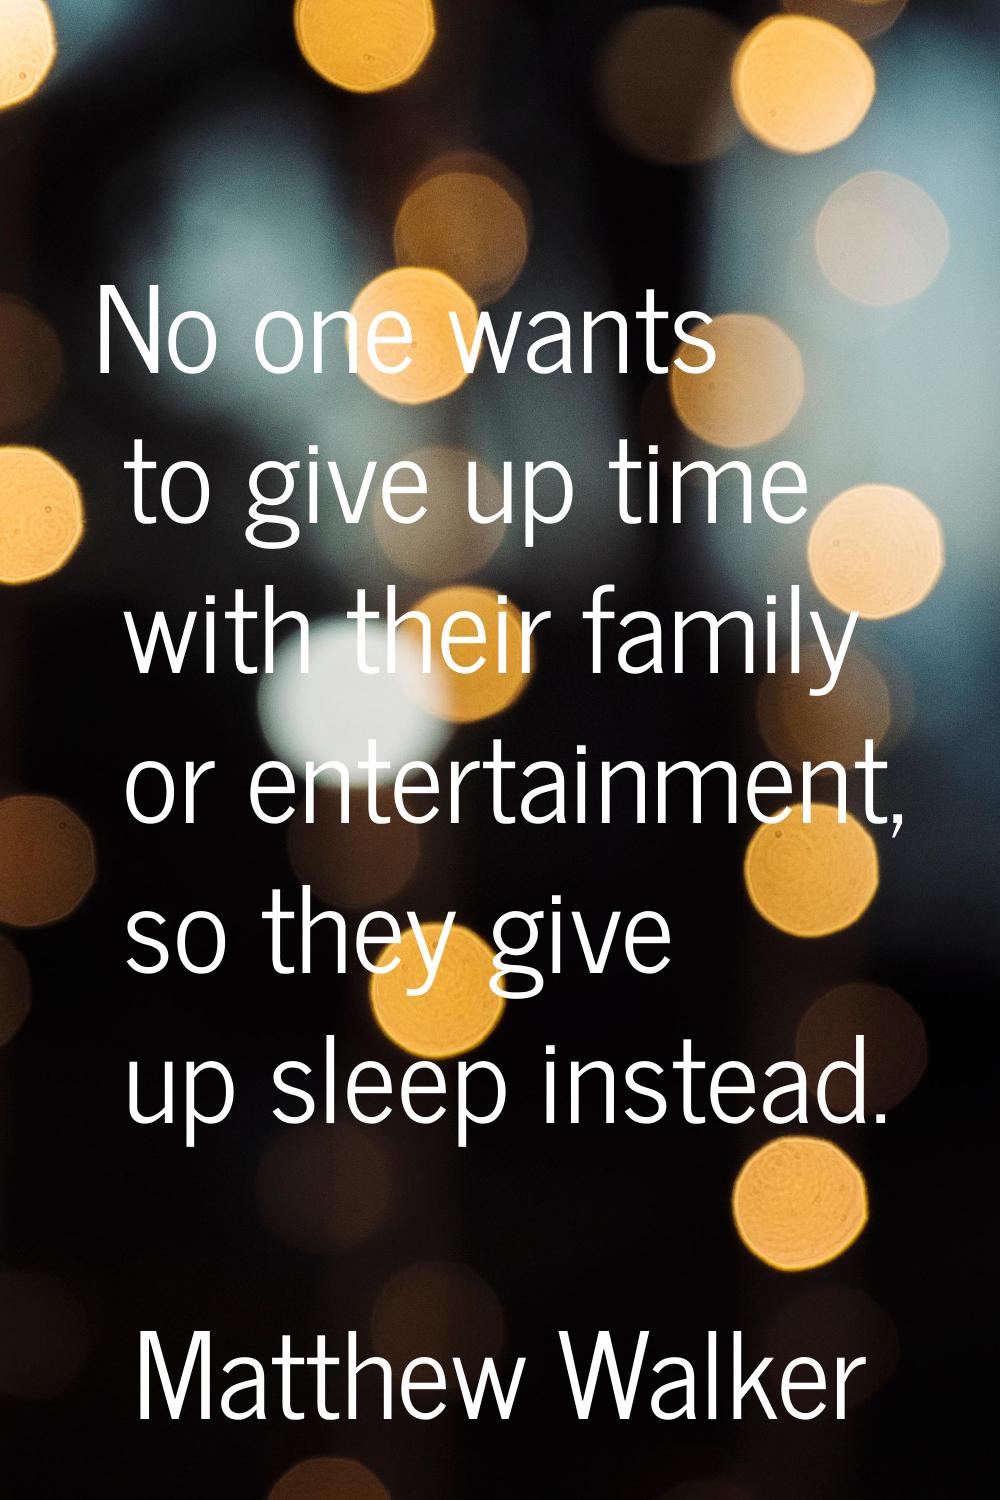 No one wants to give up time with their family or entertainment, so they give up sleep instead.